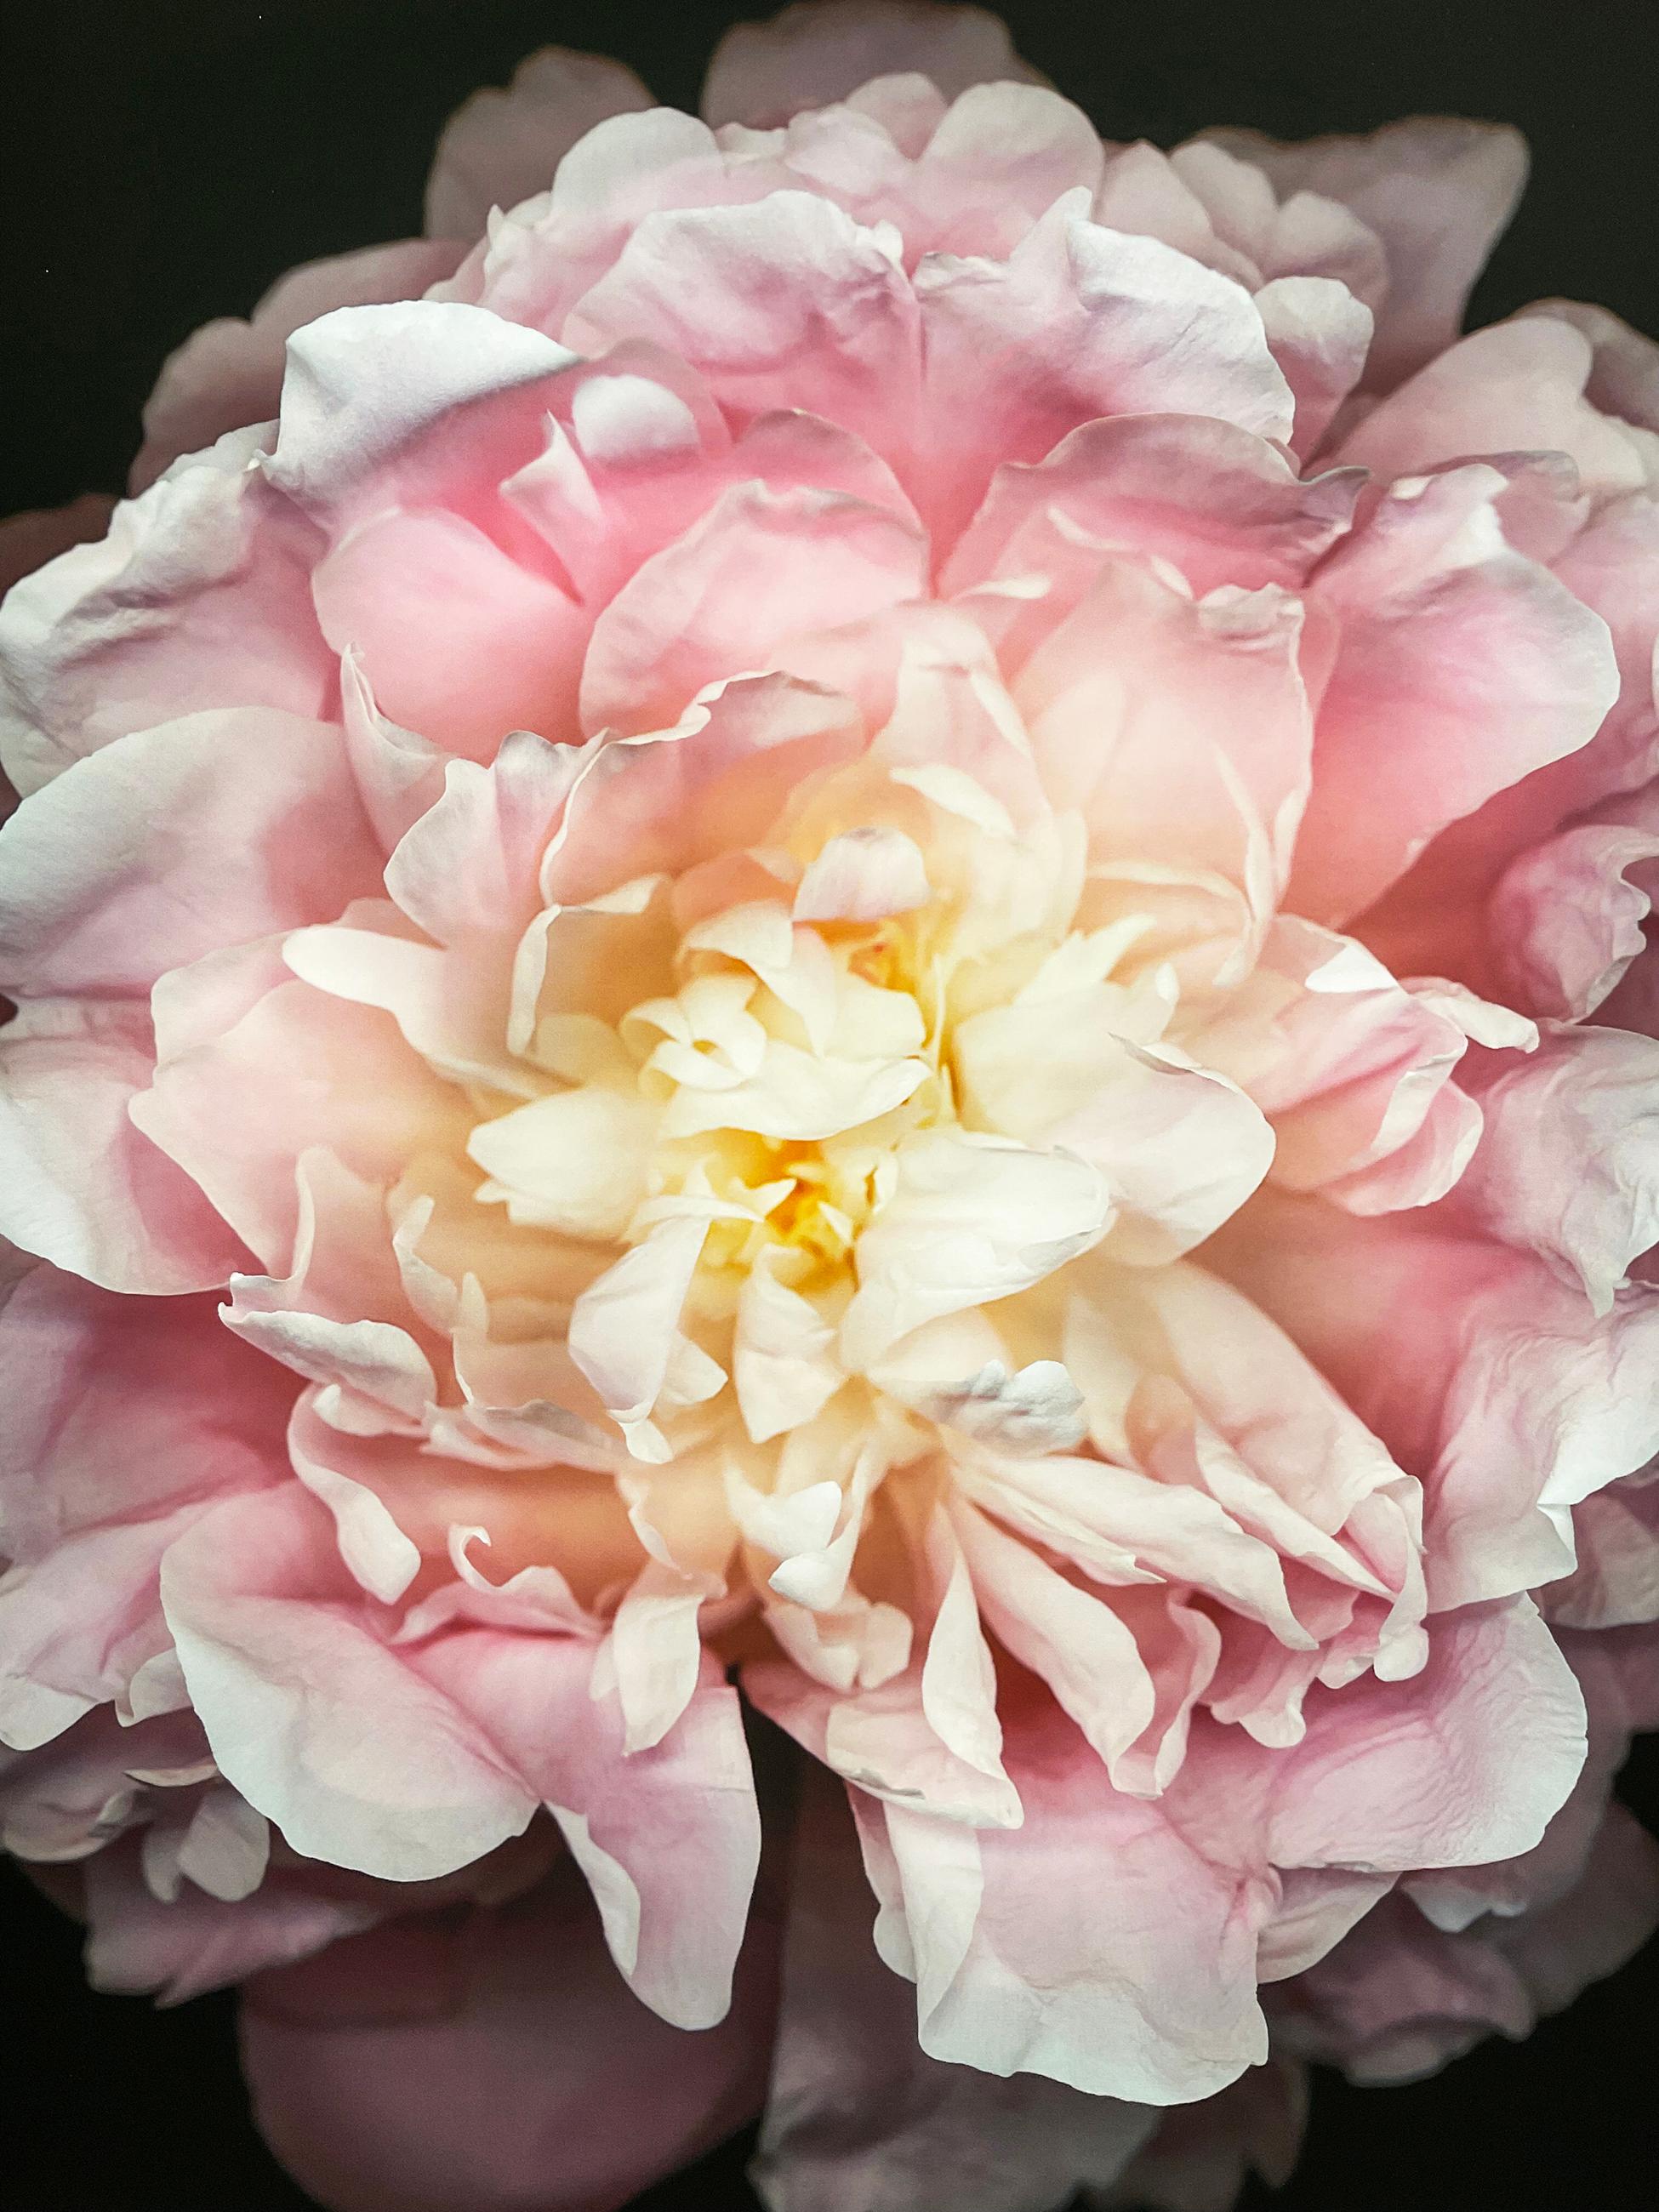 No. 47 (Framed Flower Still Life Photograph of a Pink Peony on Black)  For Sale 1